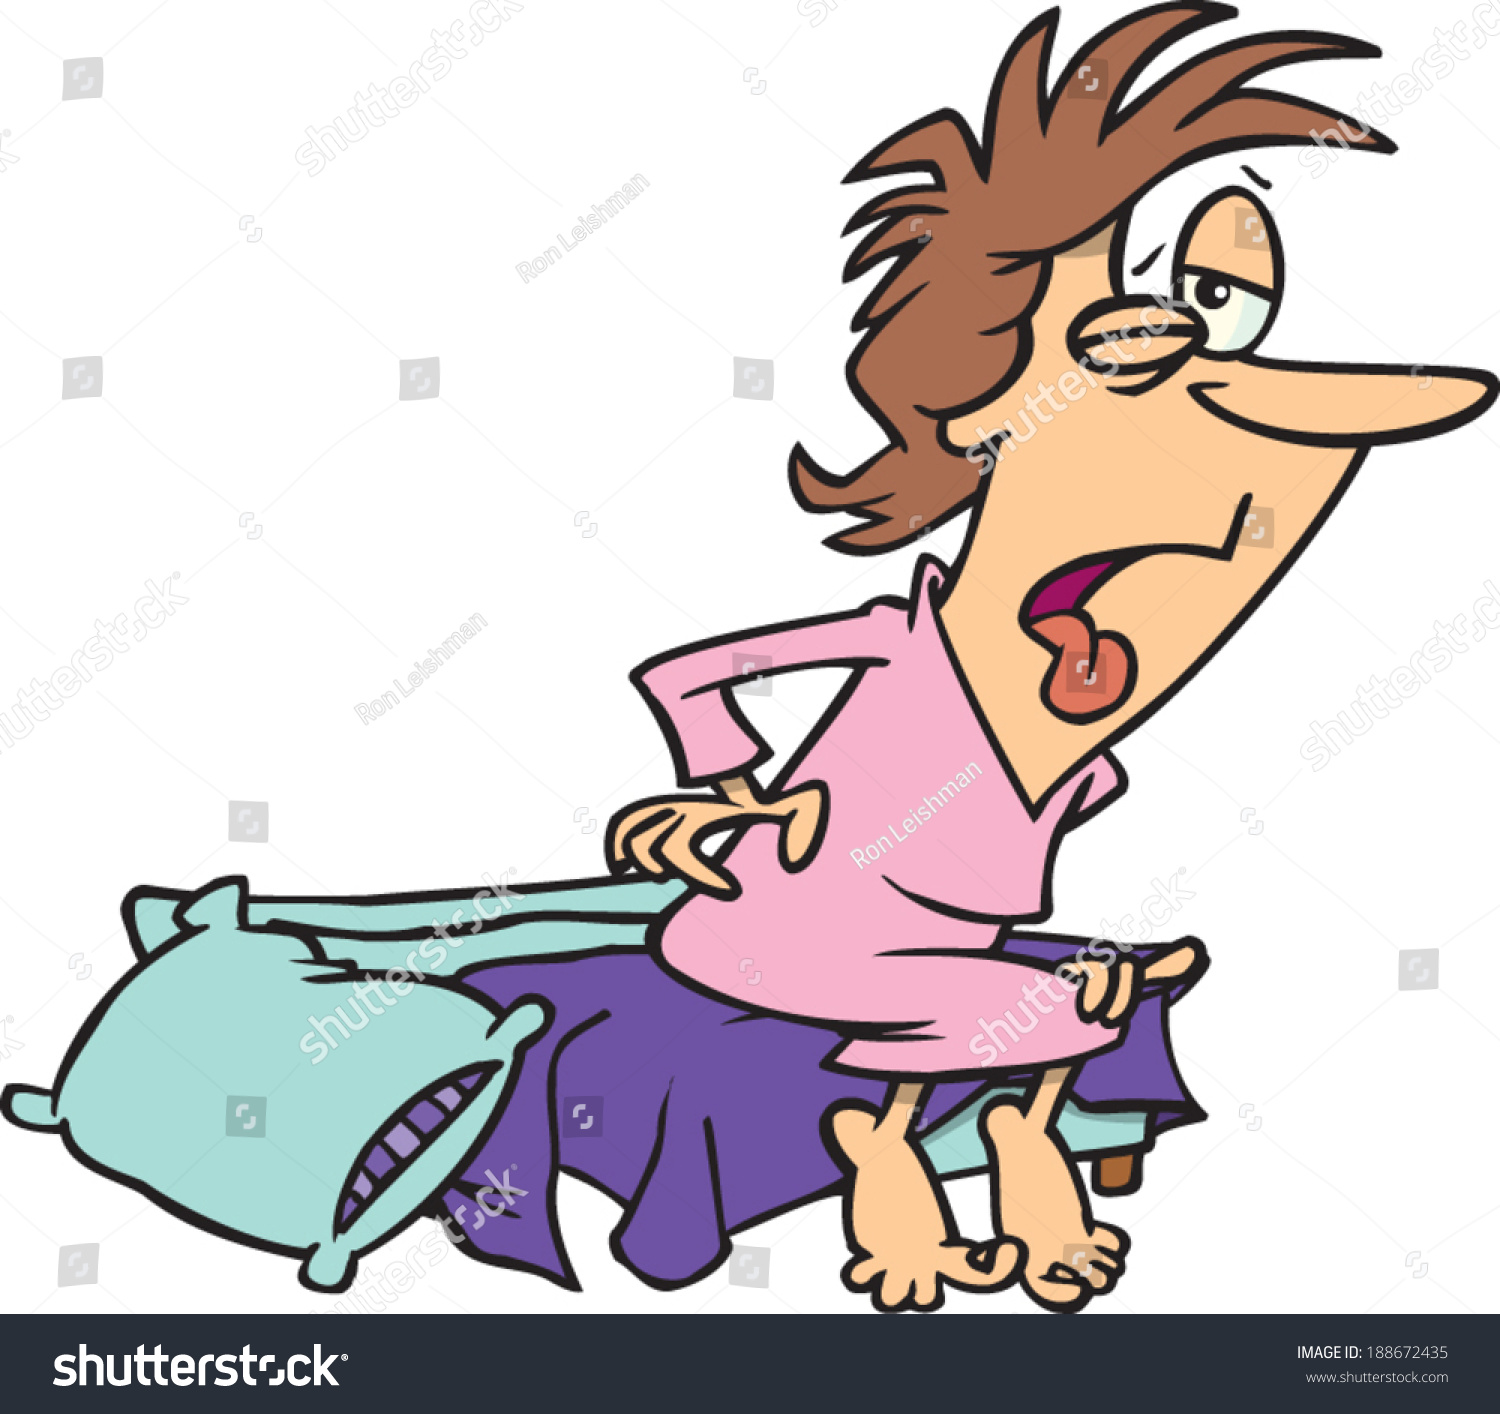 Tired Cartoon Woman Getting Out Bed Stock Vector Royalty Free 188672435 Shutterstock